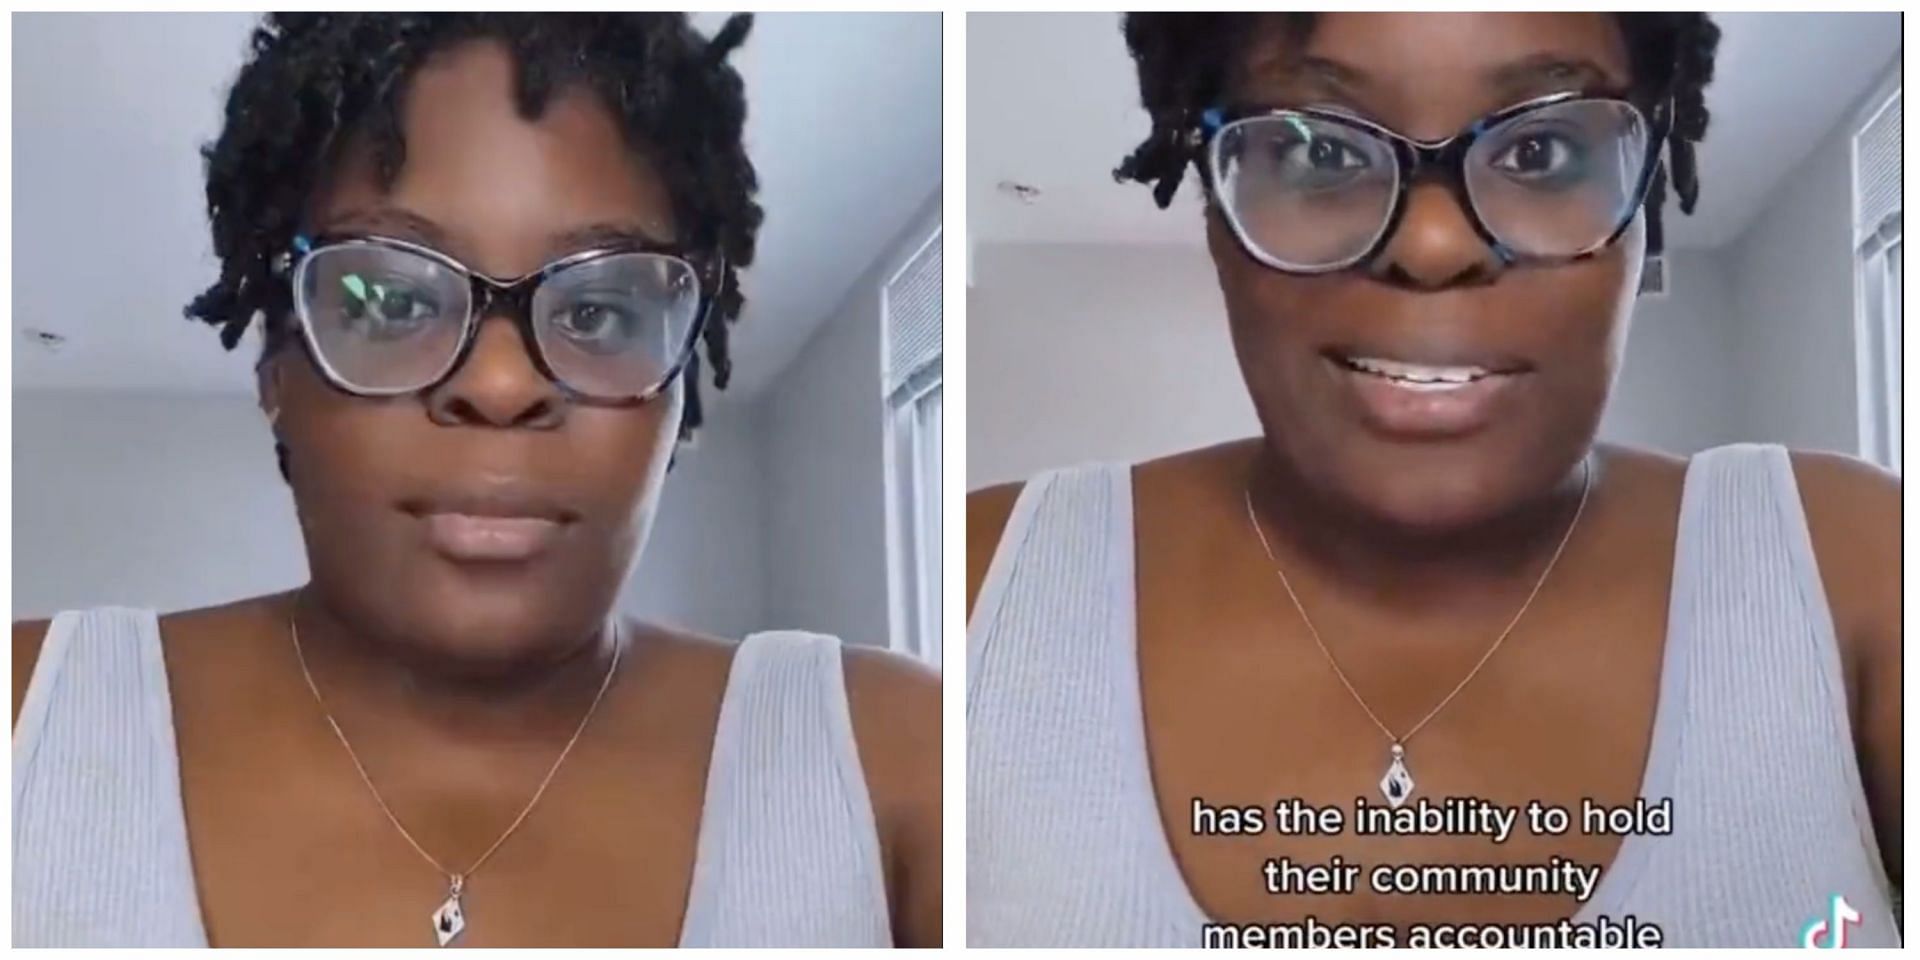 Social media users slam a TikToker for spreading hateful messages against the white community: Netizens react to the racist comments. (Image via TikTok)